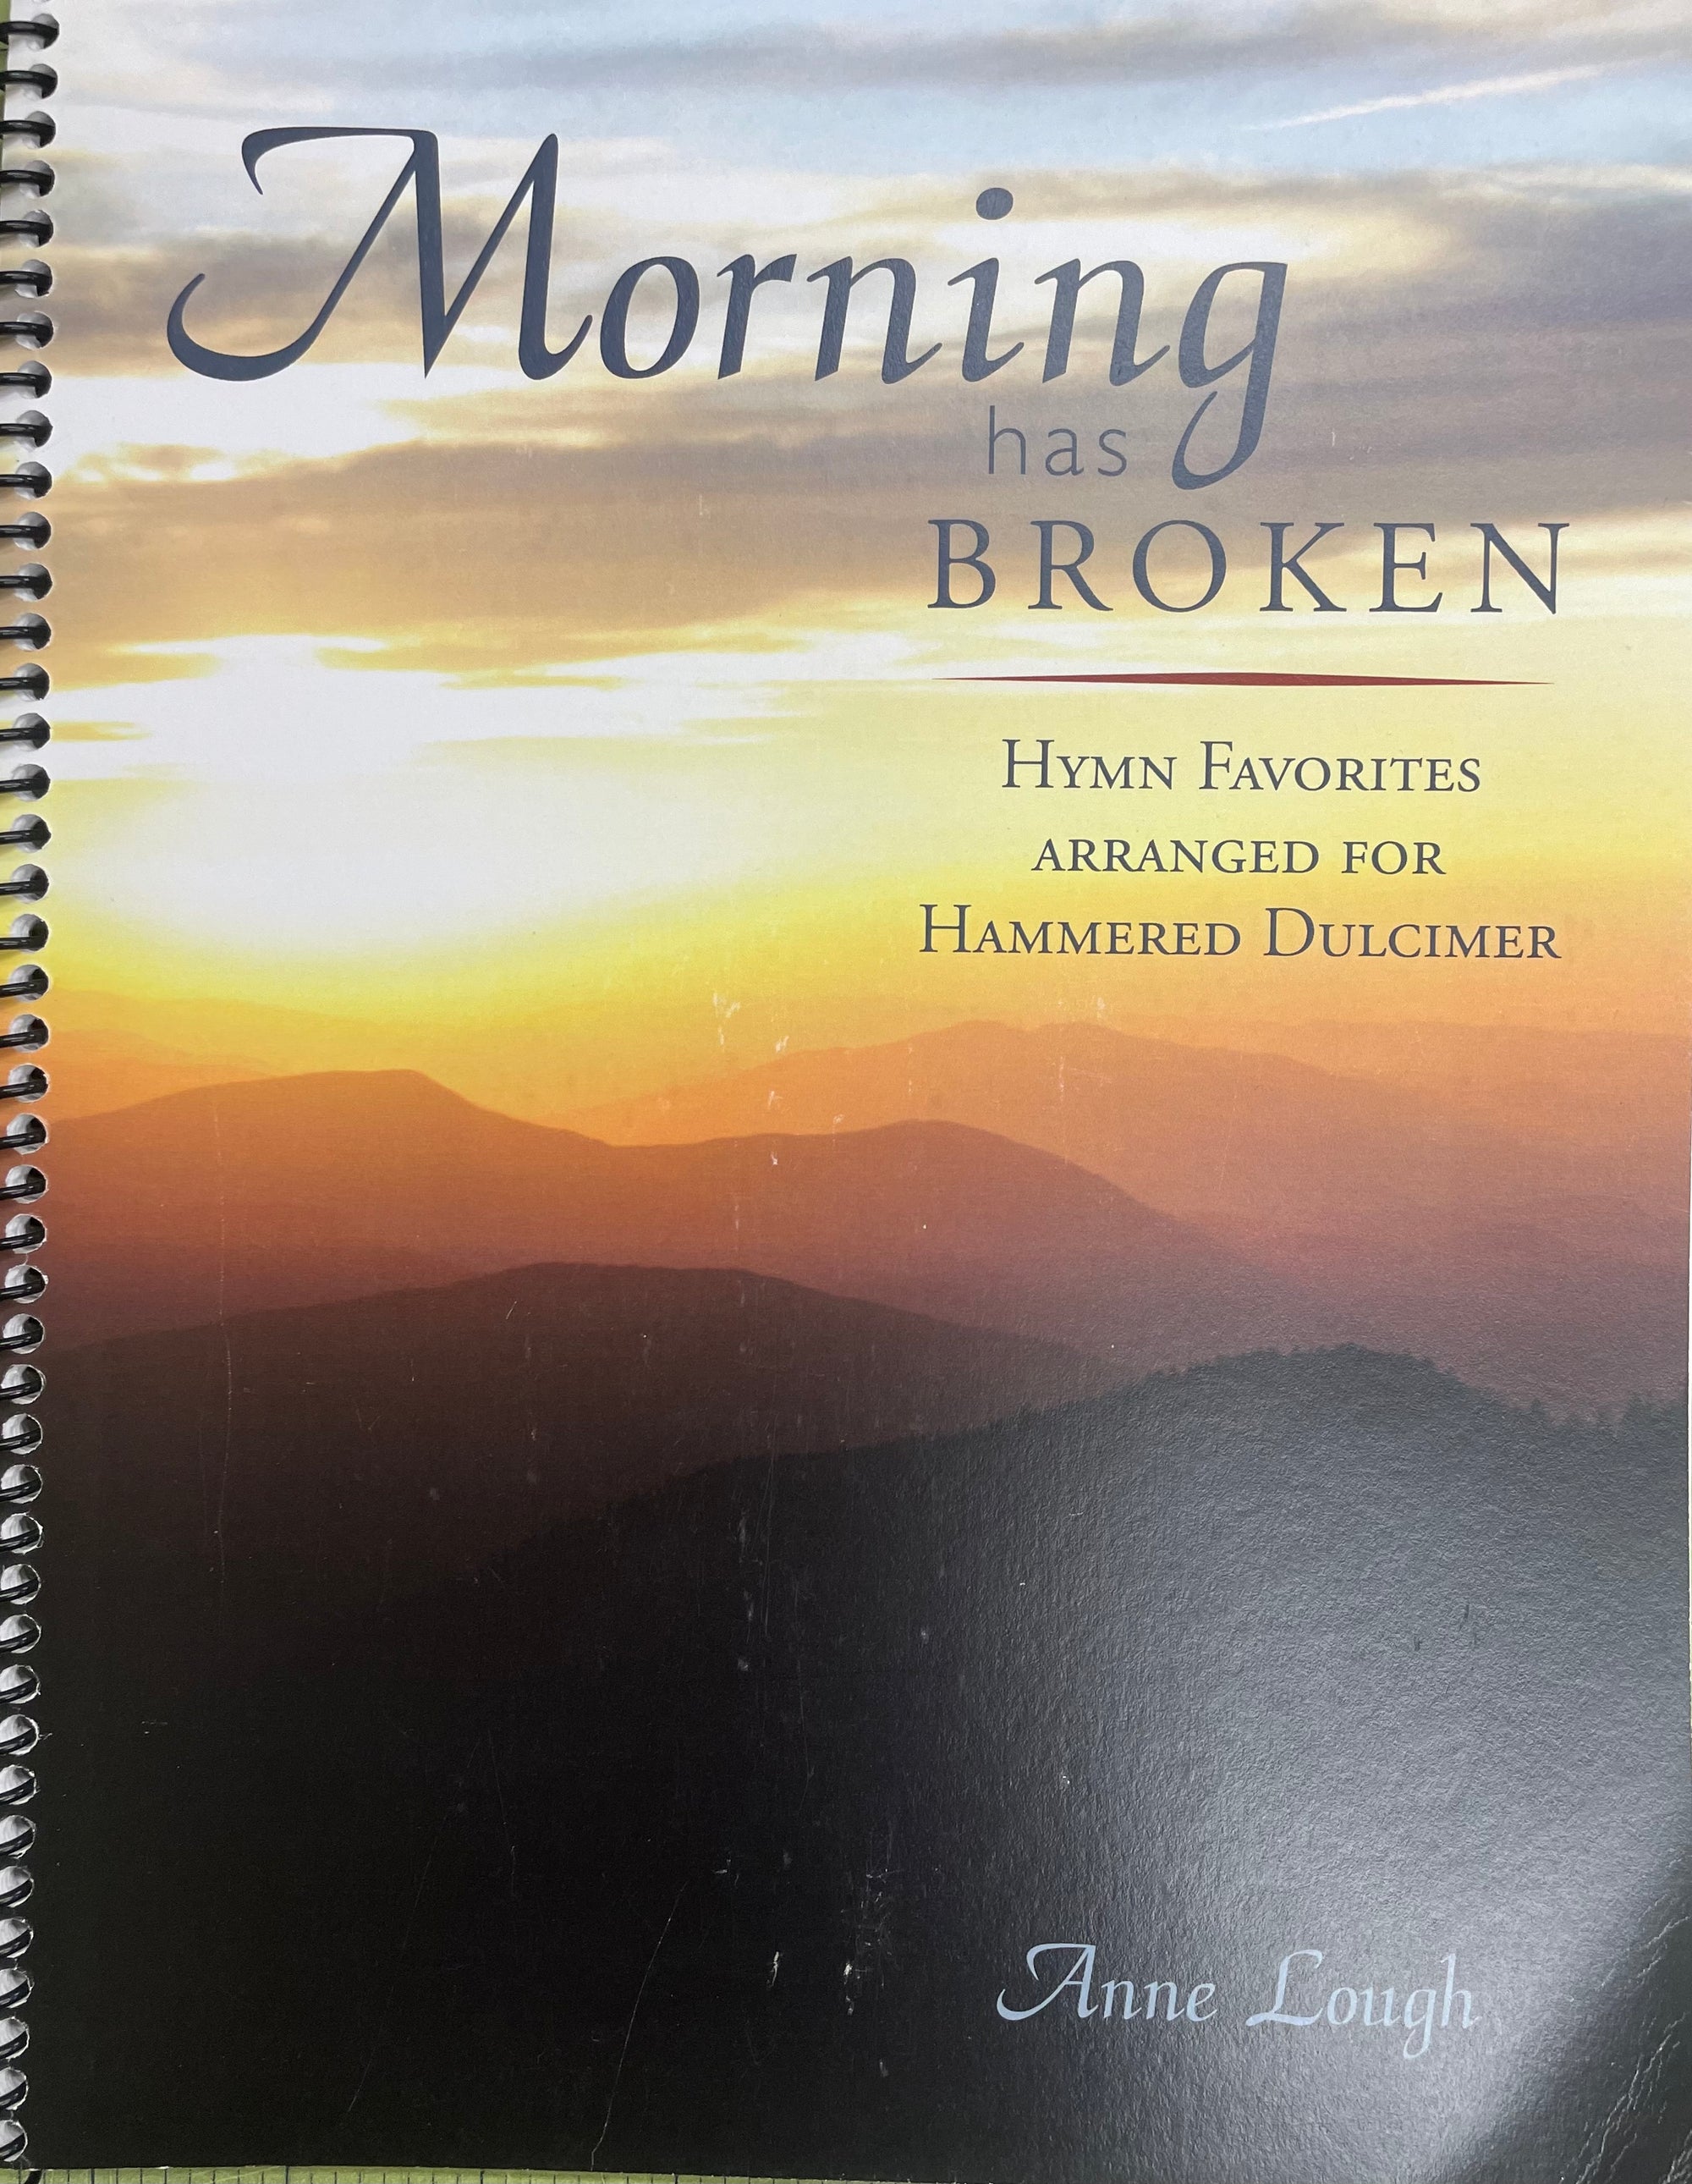 Spiral-bound book titled "Morning Has Broken by Anne Lough" featuring a sunrise over mountains on the cover.